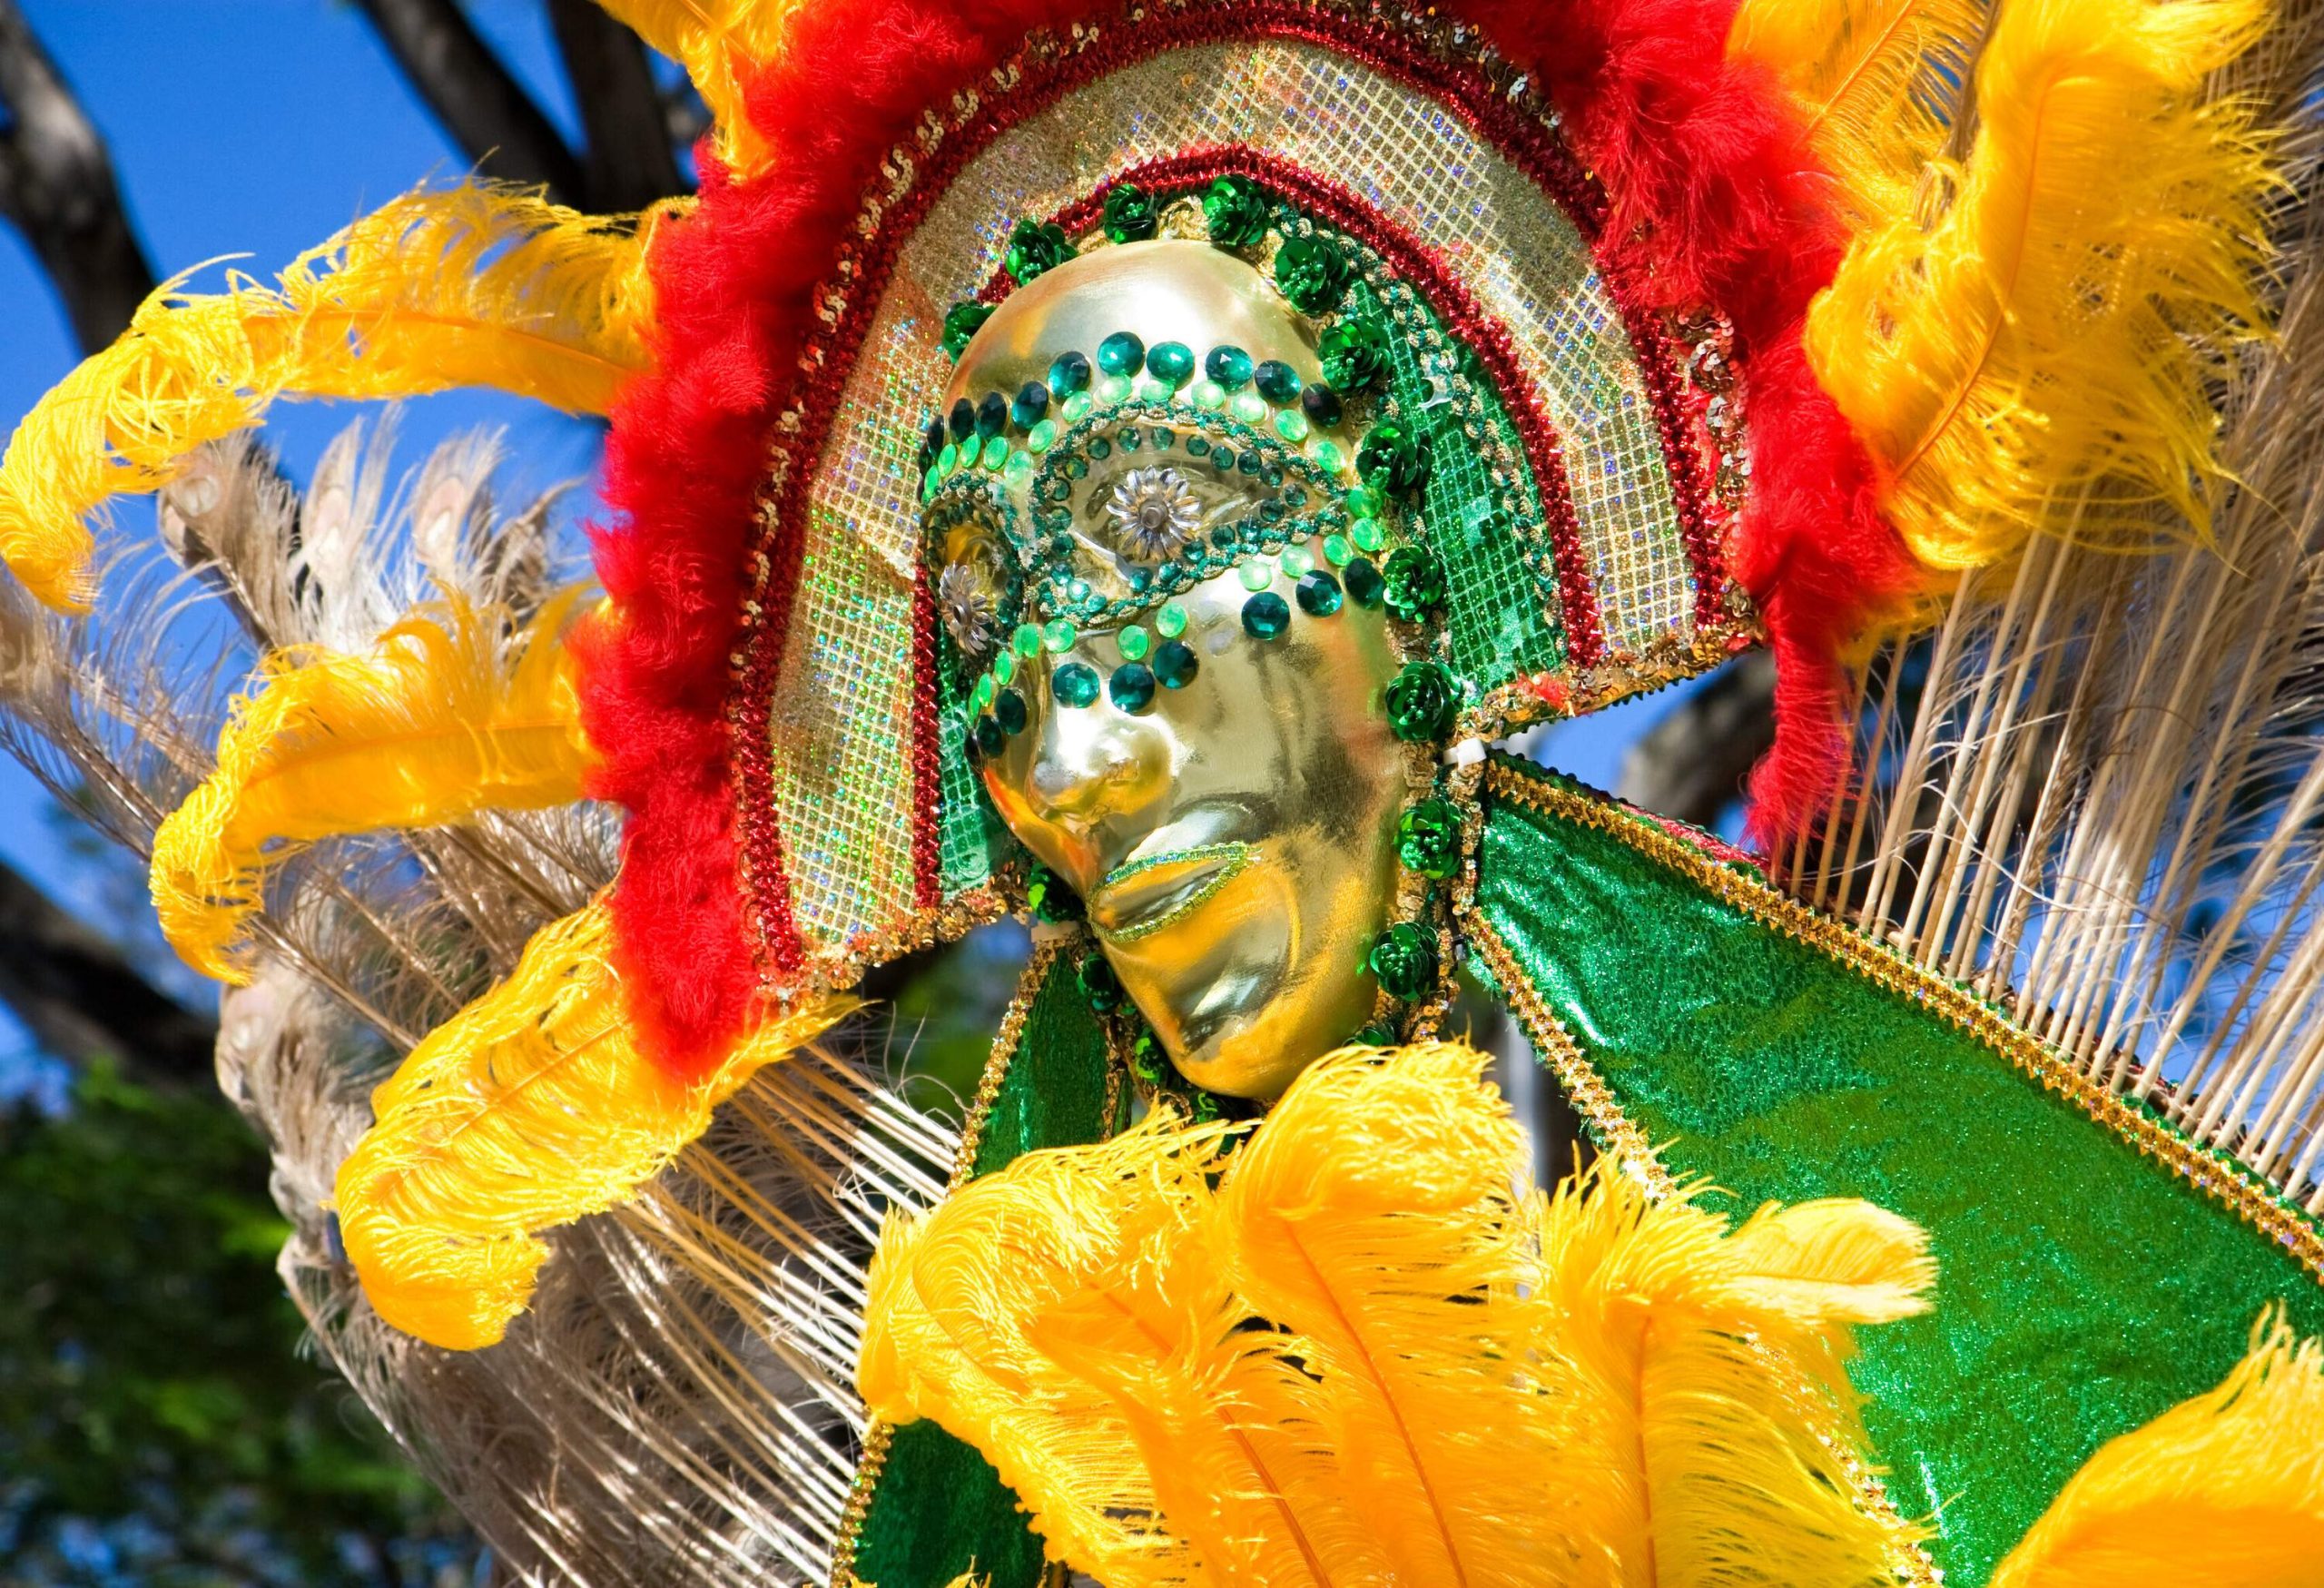 A vibrant carnival costume embellished with feathers and beads.